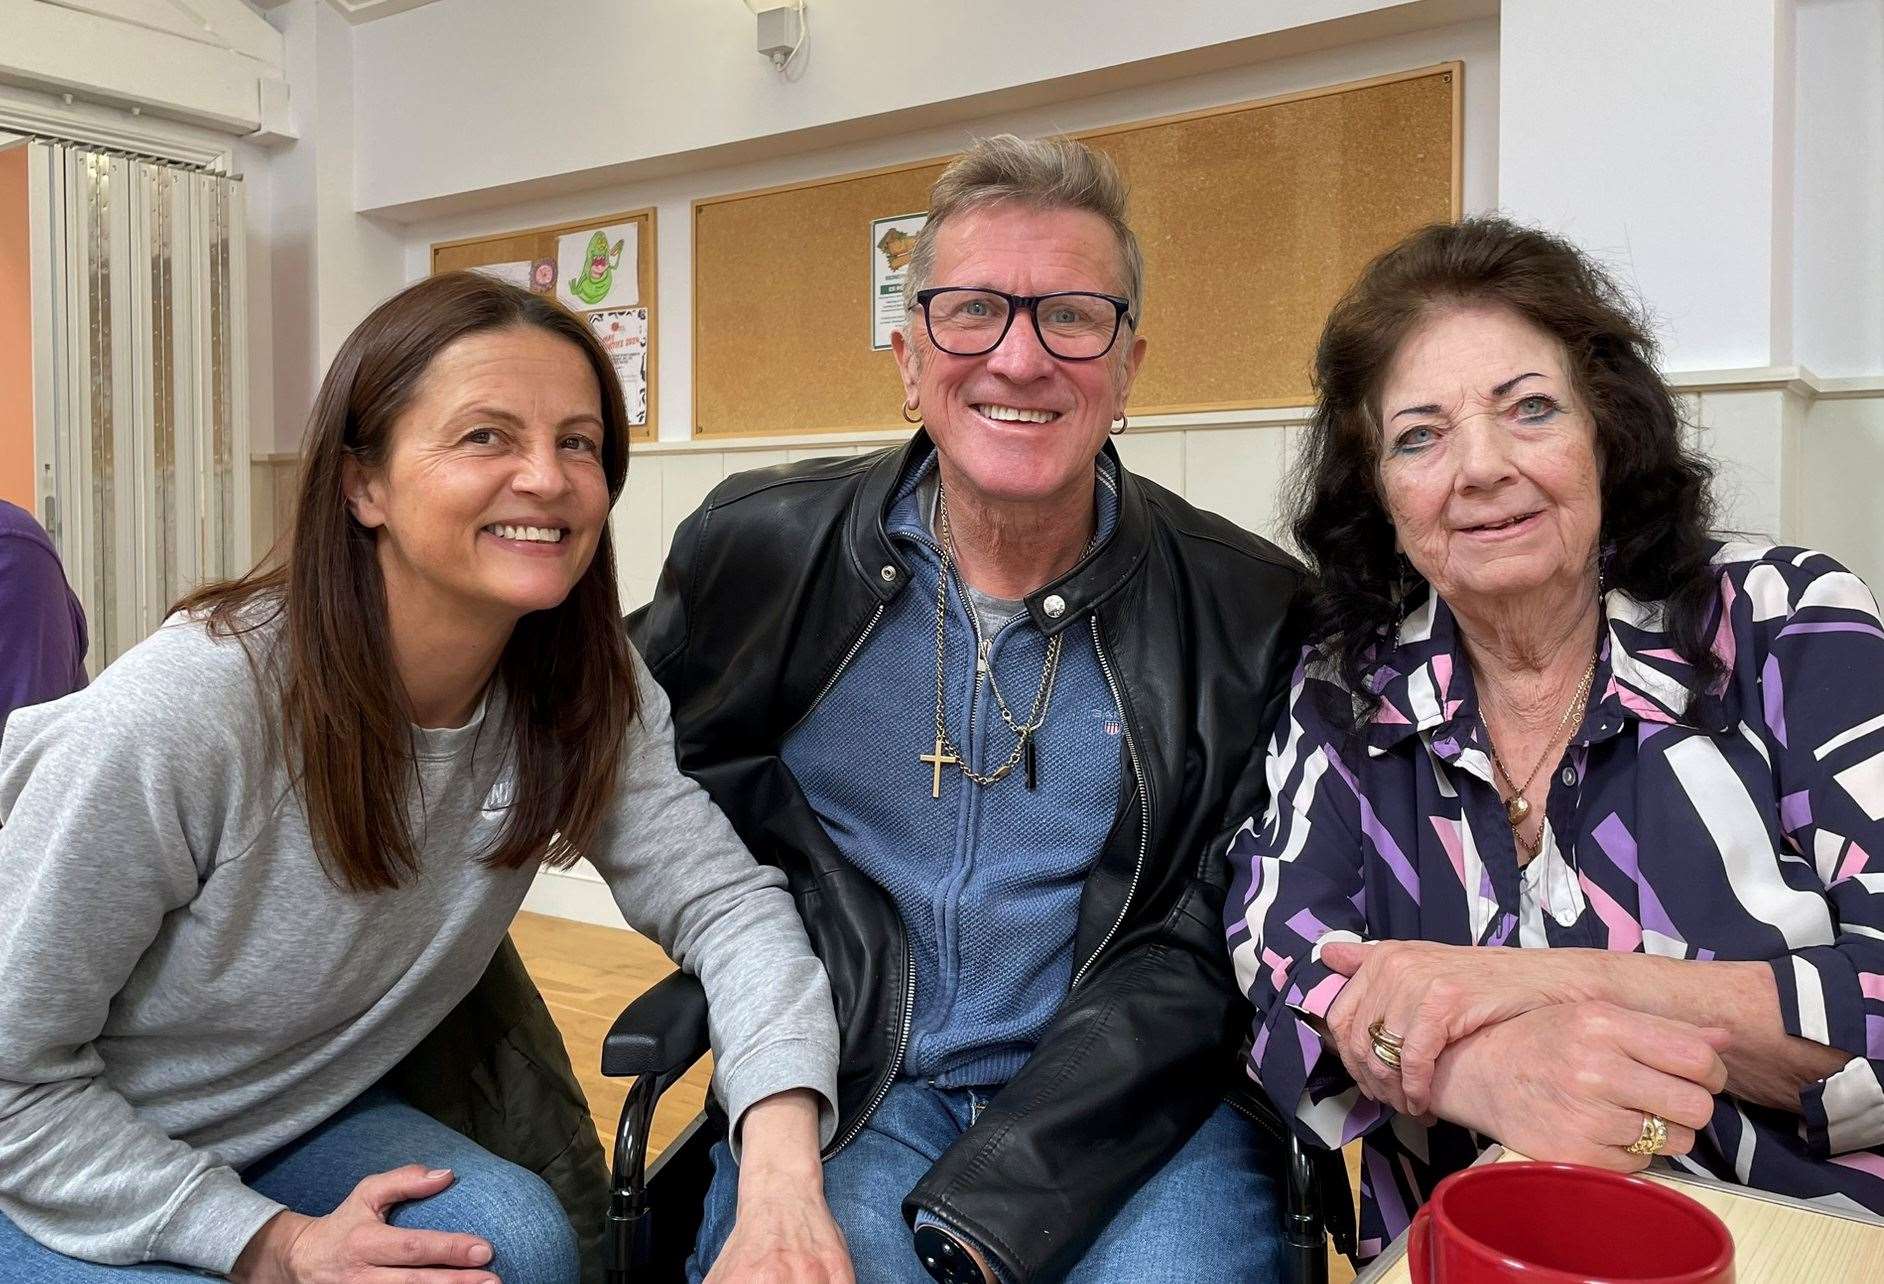 Stroke survivor Gavin Dunn with his wife Victoria and mum Frances at Hope Street Community Centre during a meeting of Swale Stroke Group. Picture: Joe Crossley